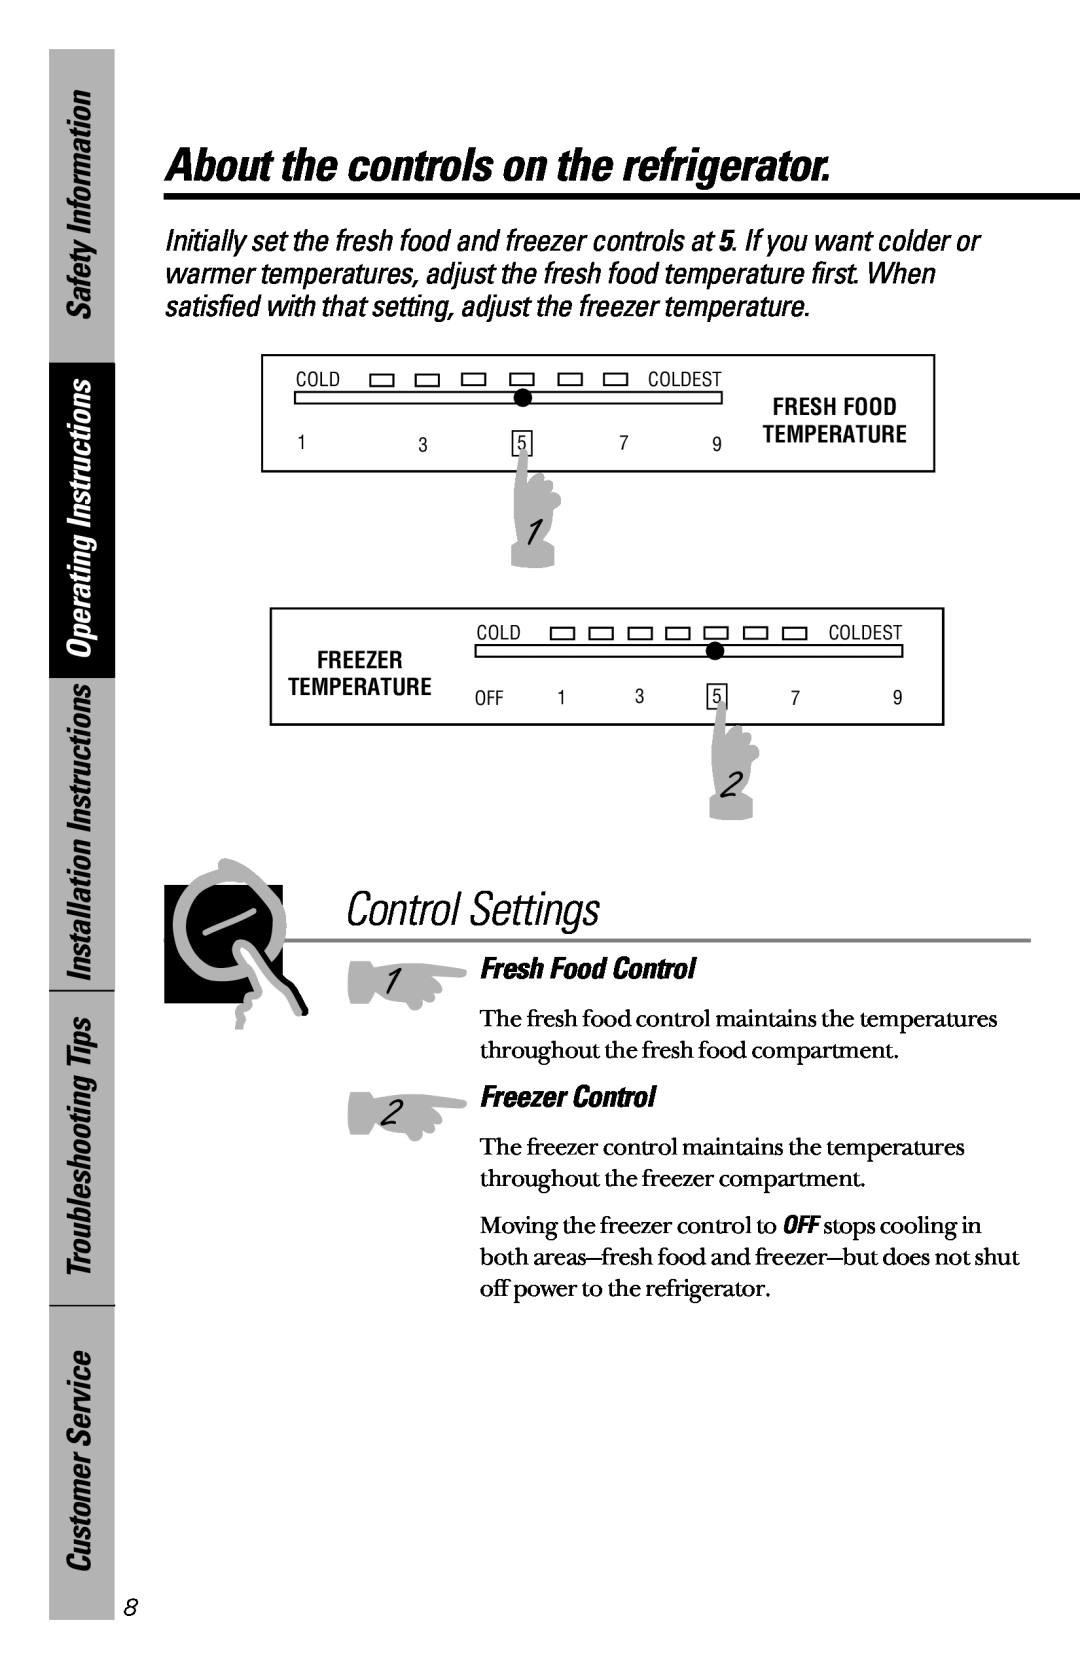 GE 28, 30 owner manual About the controls on the refrigerator, Control Settings 